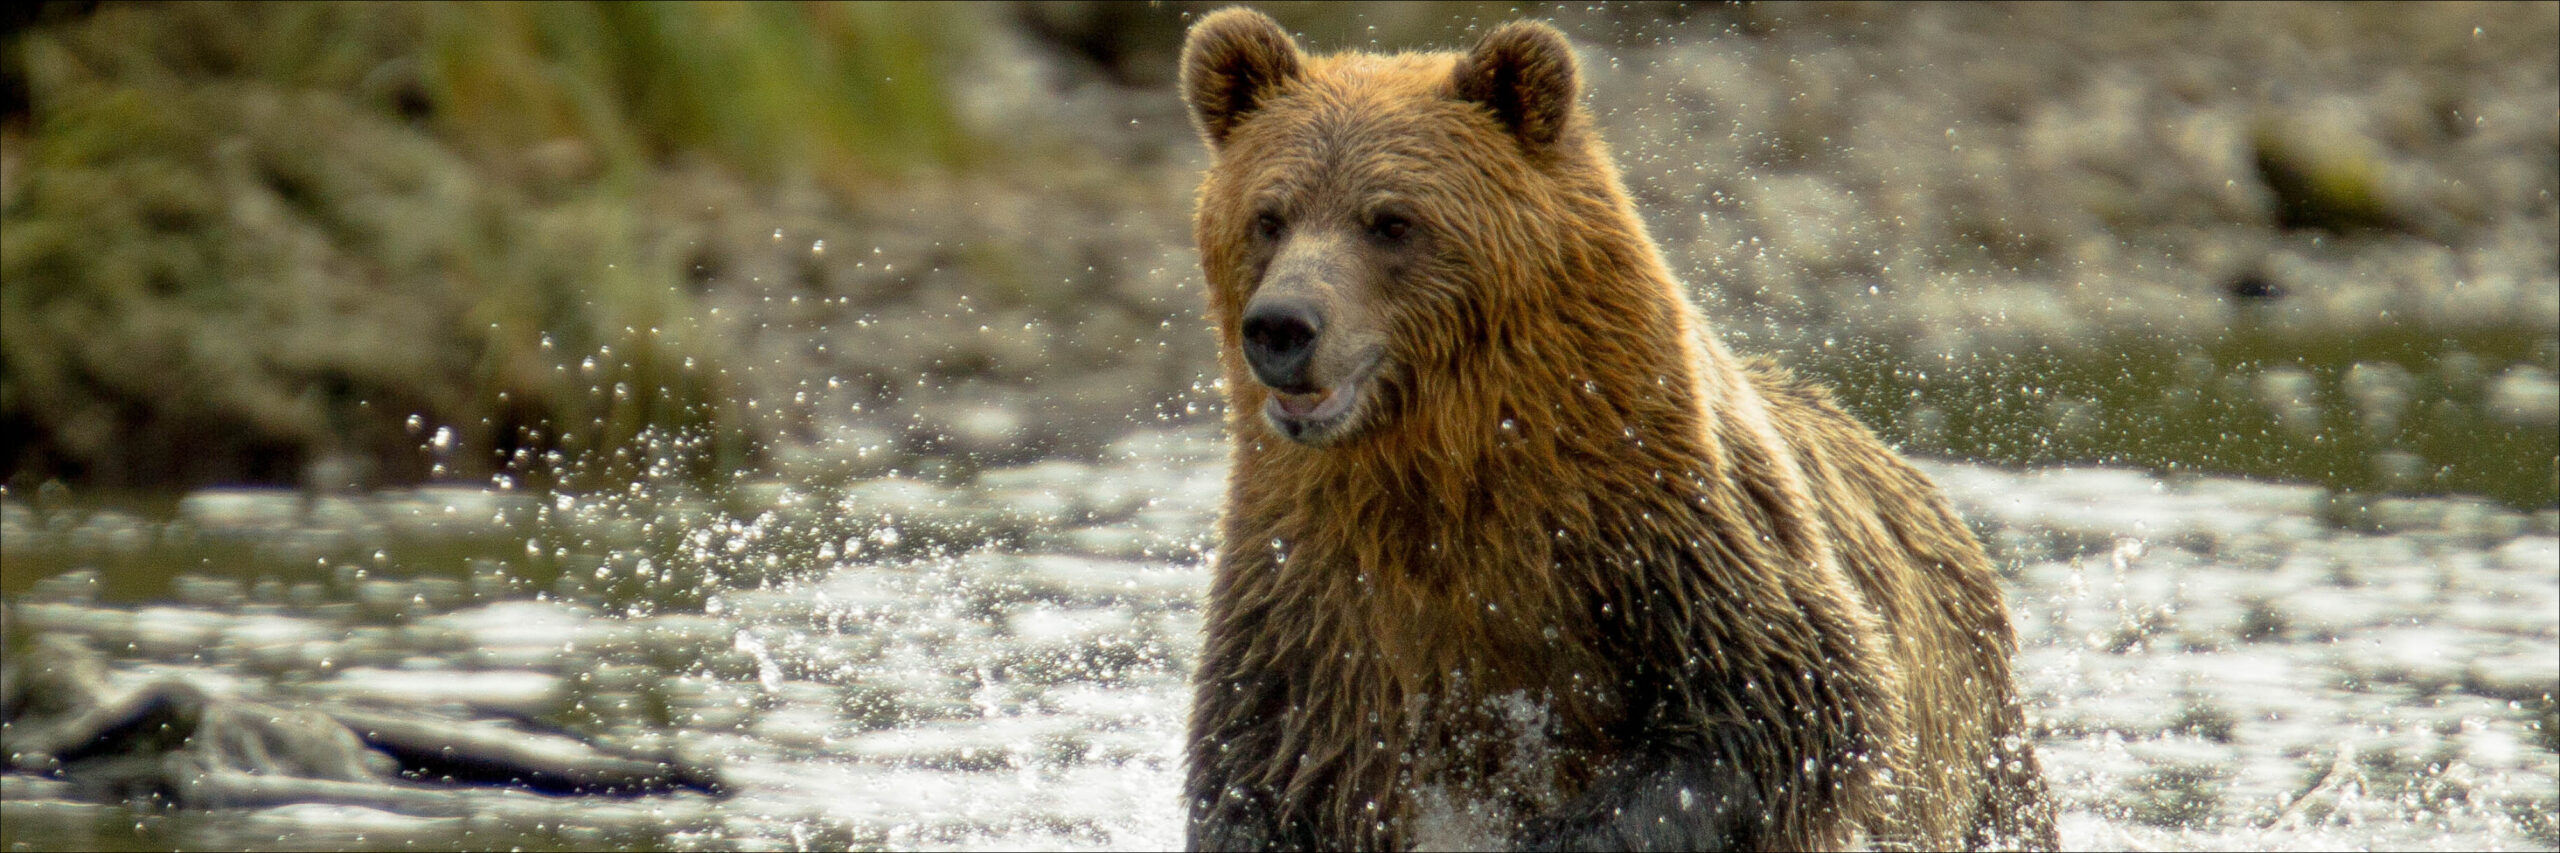 common-grizzly-bear